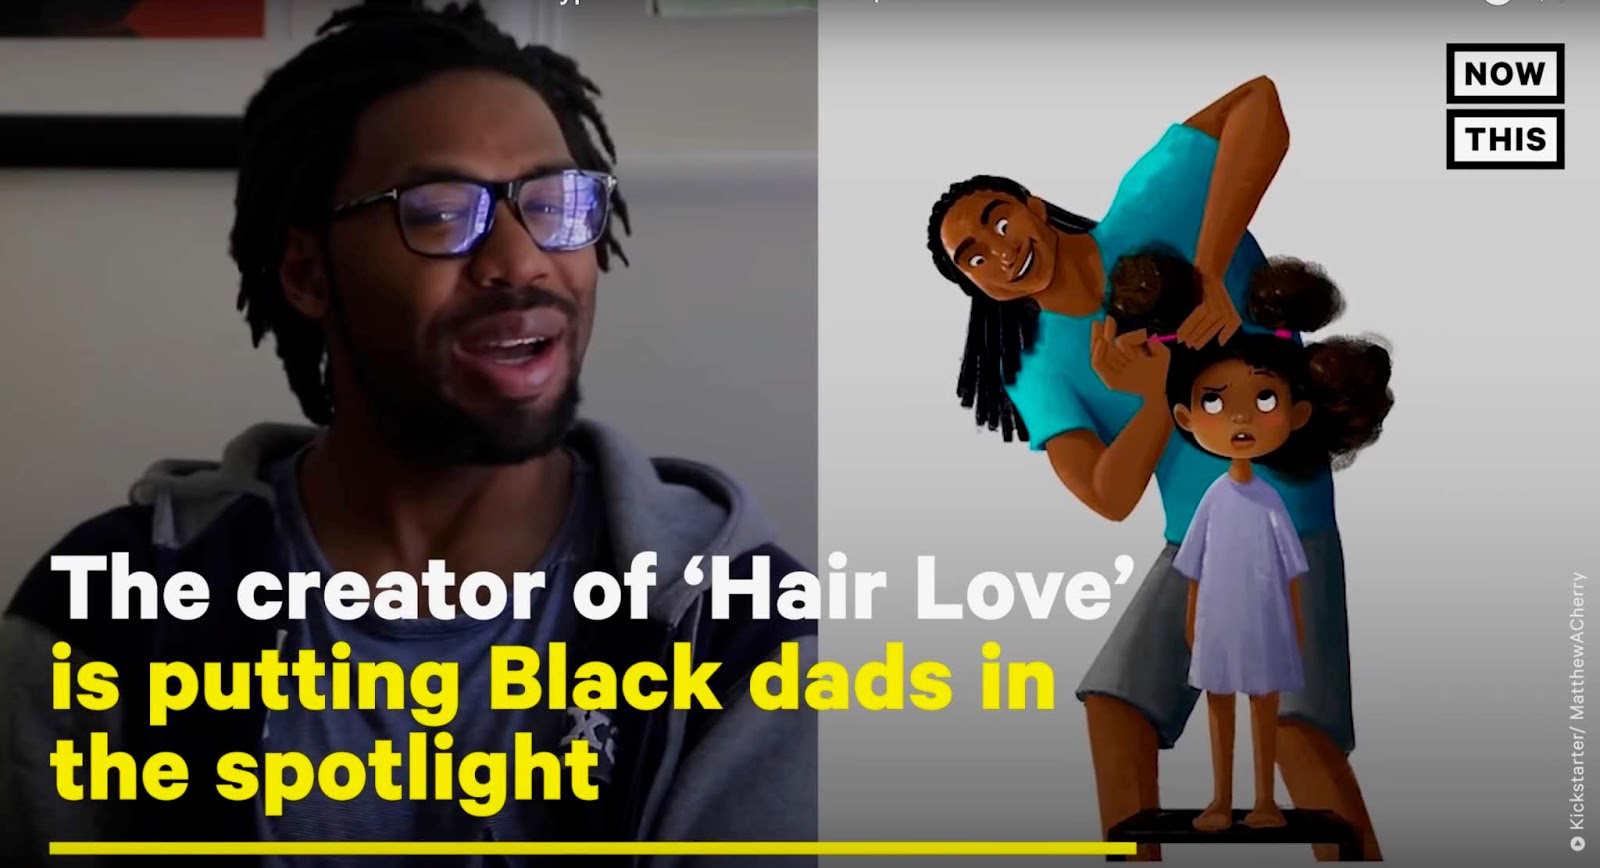 10. Blonde hair stereotypes for dads - wide 6